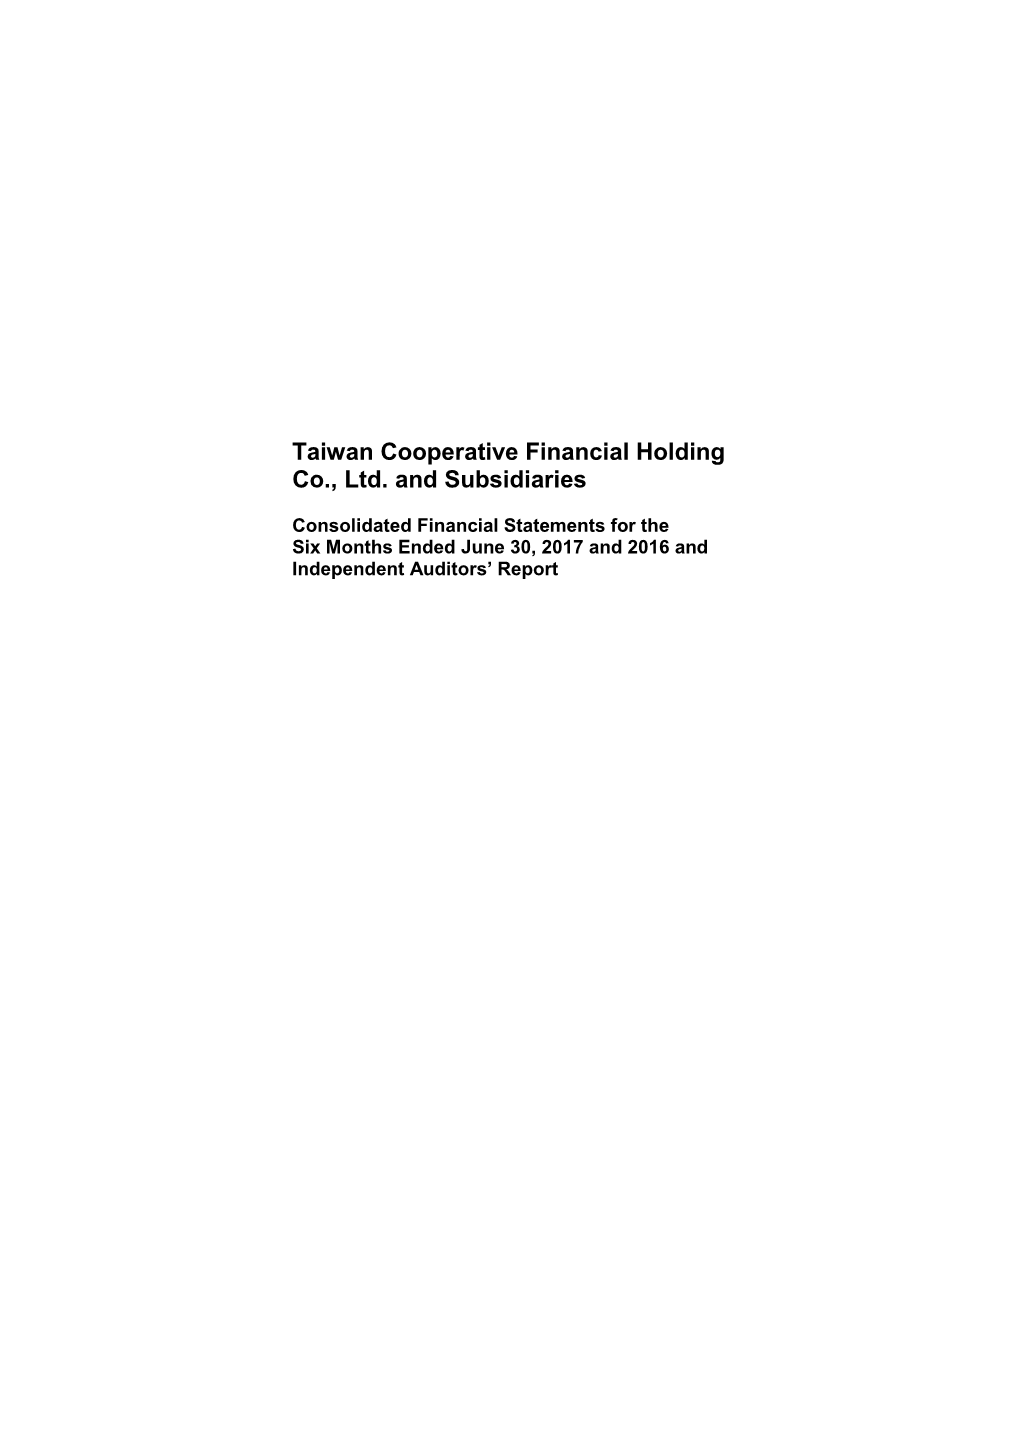 Taiwan Cooperative Financial Holding Co., Ltd. and Subsidiaries